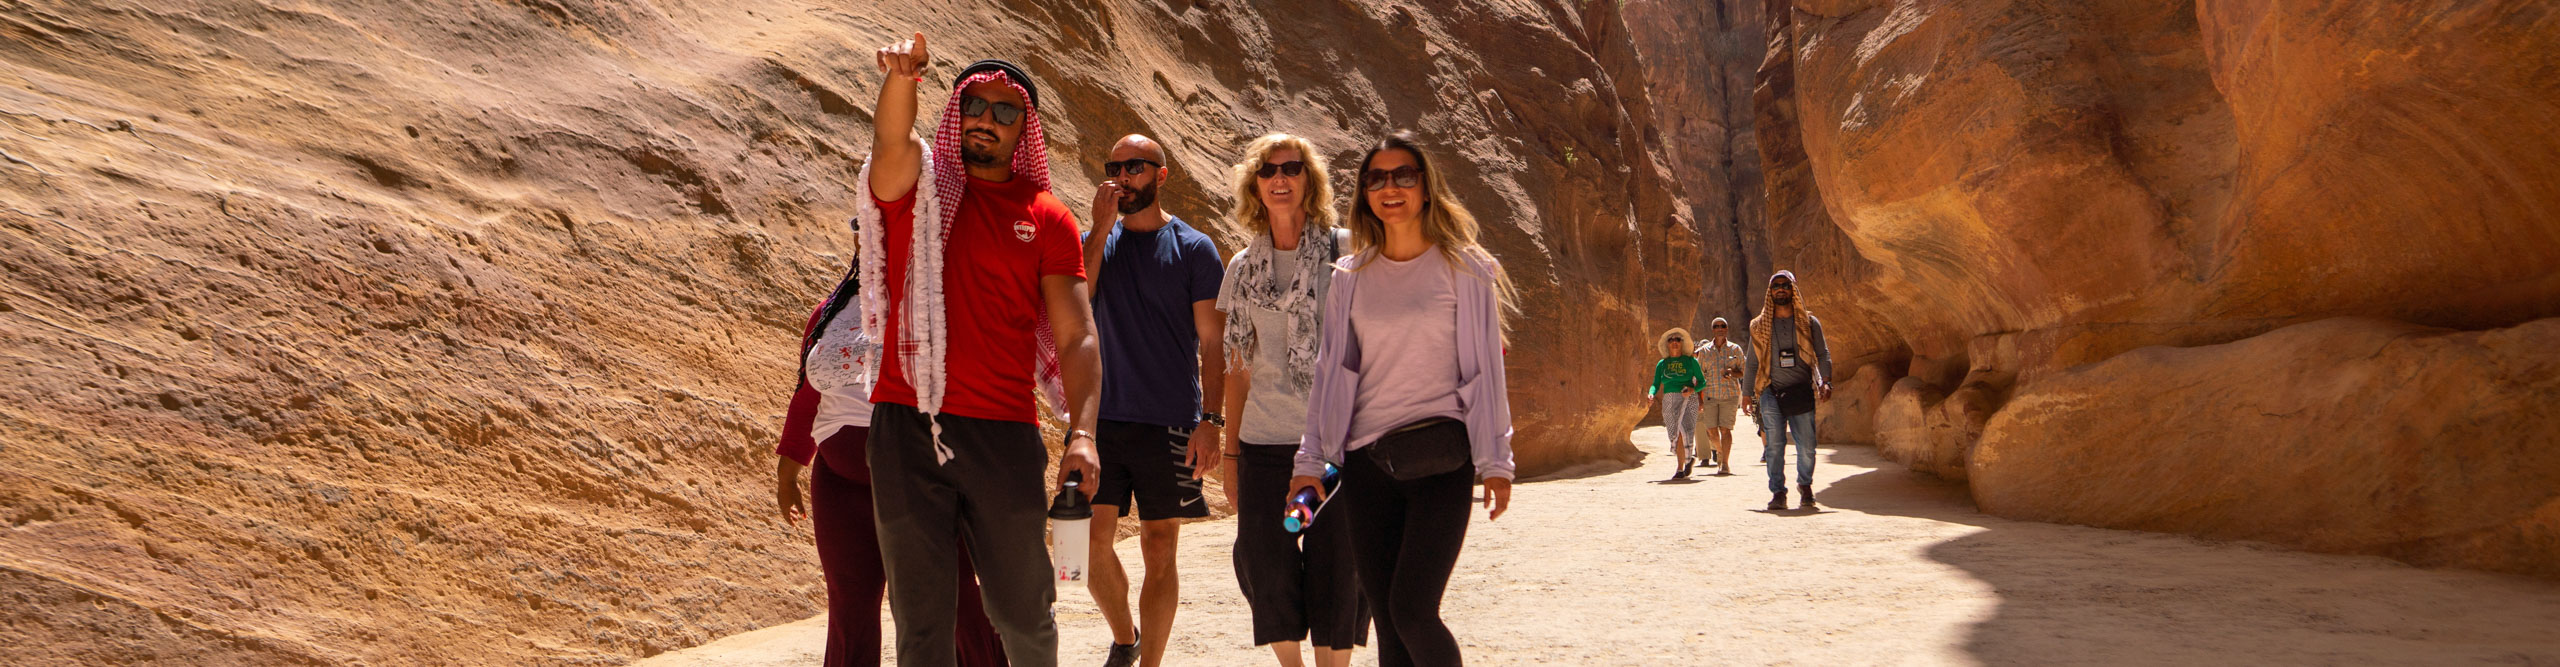 Group waling through the ancient ruins and caverns of Petra, Jordan on a sunny day 